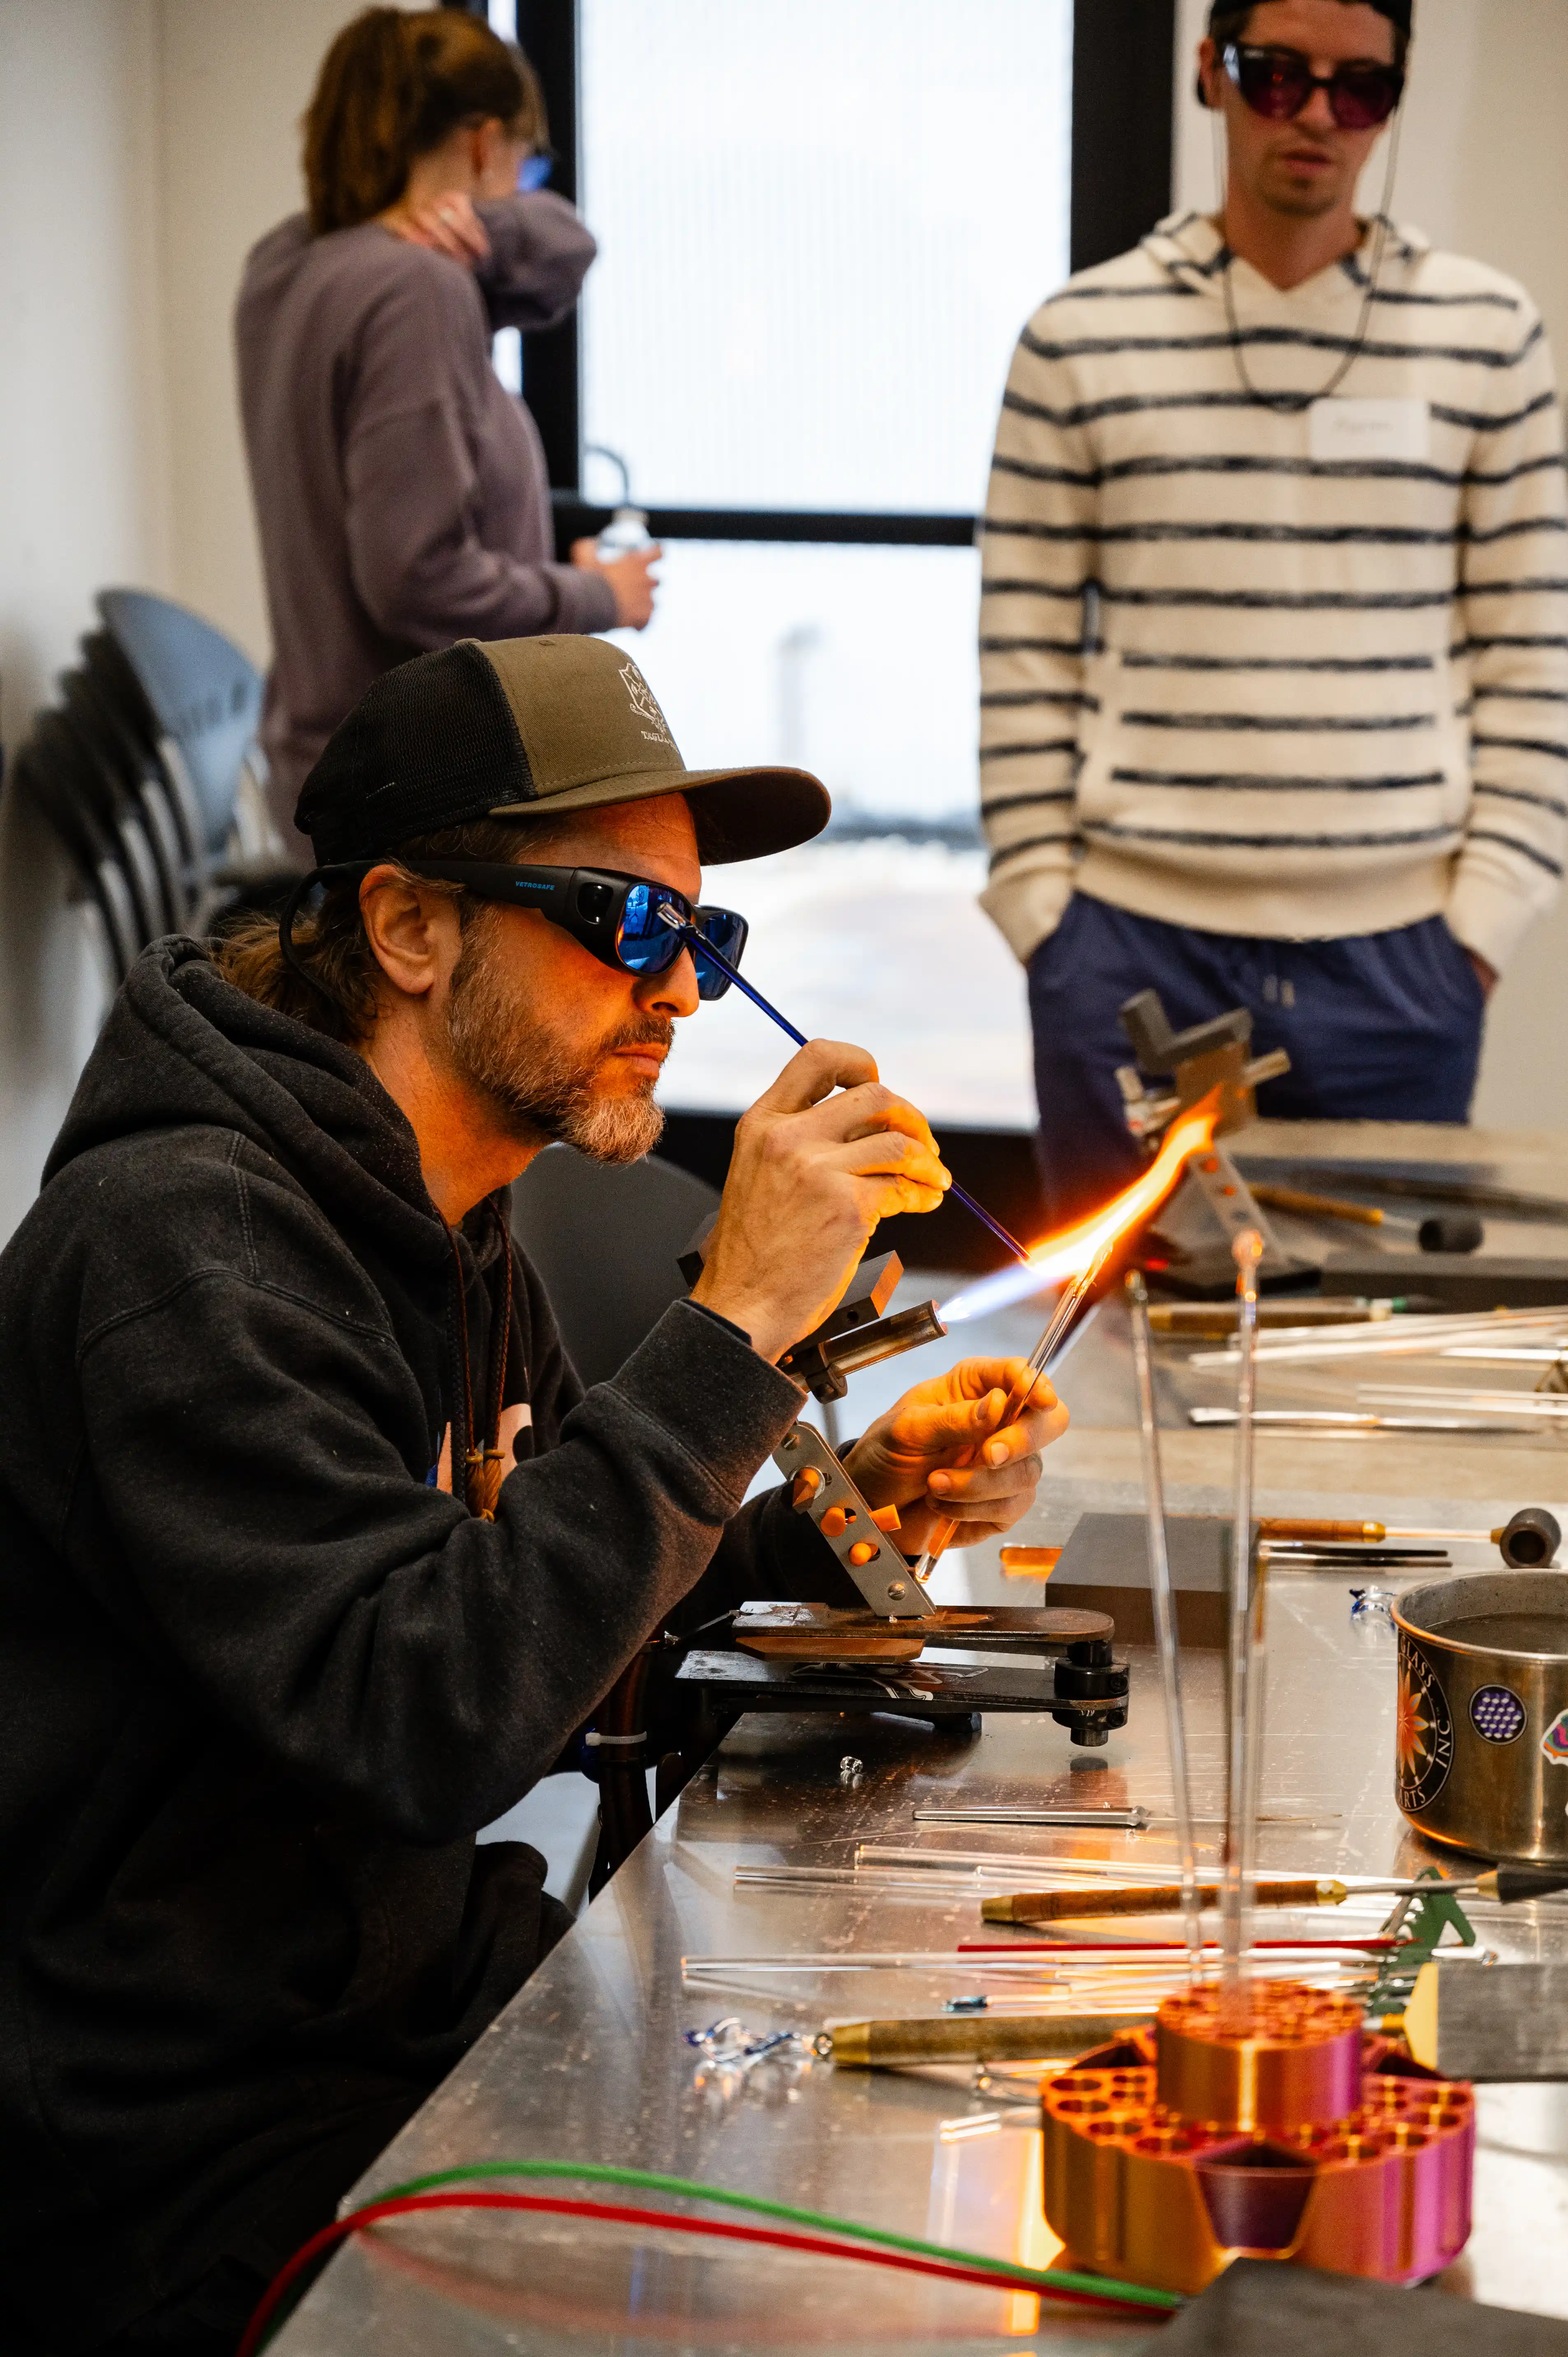 Glassblower creating glass art using a torch in a workshop with observers in the background.